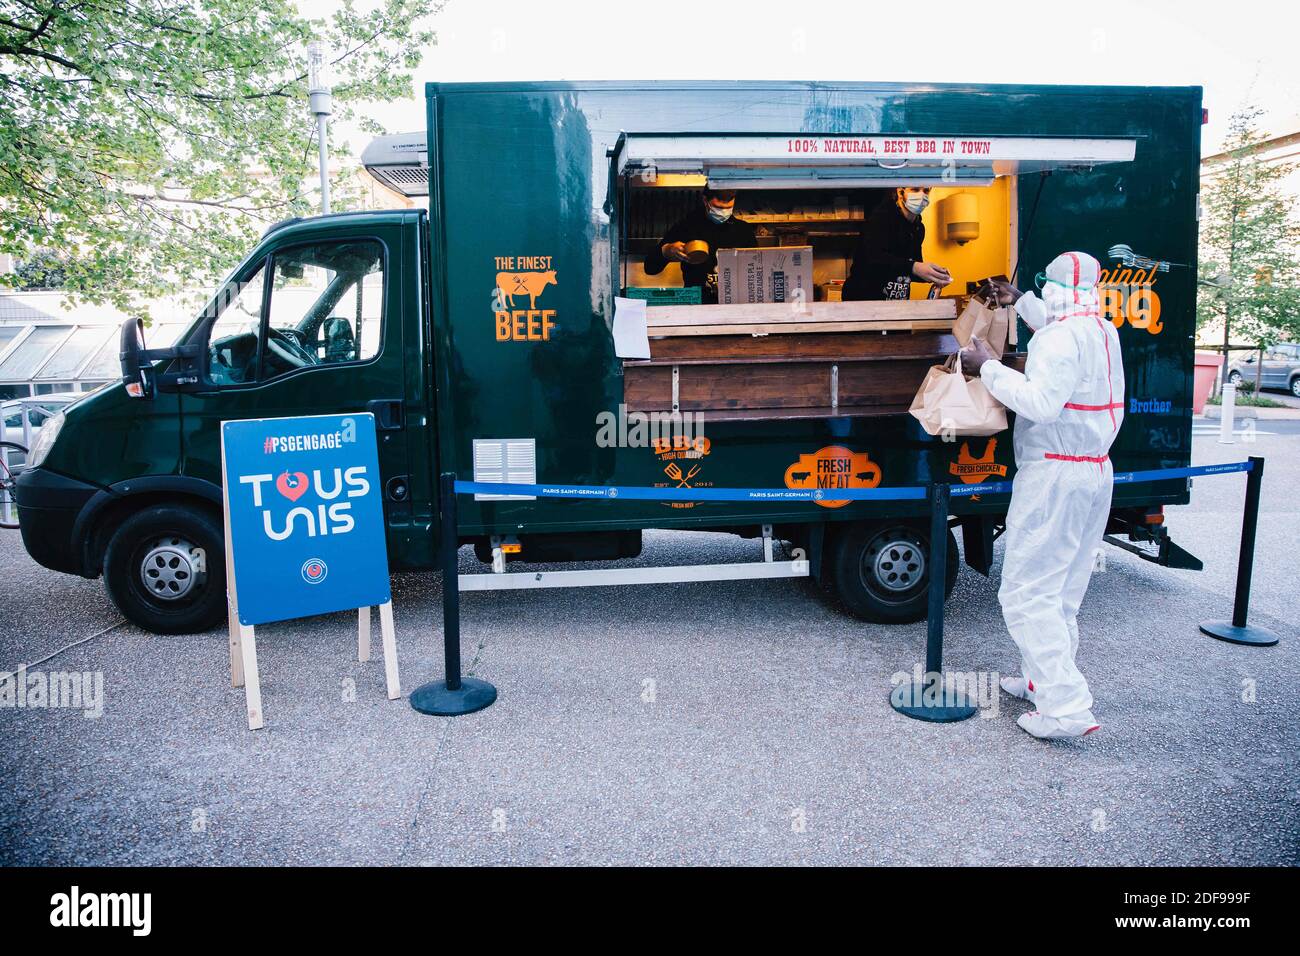 Paris Saint-Germain are providing up to 1,200 meals a day free-of-charge to  help feed healthcare workers on the frontlines of the Covid-19 crisis.  Volunteers from the Street Food on the Move (Street